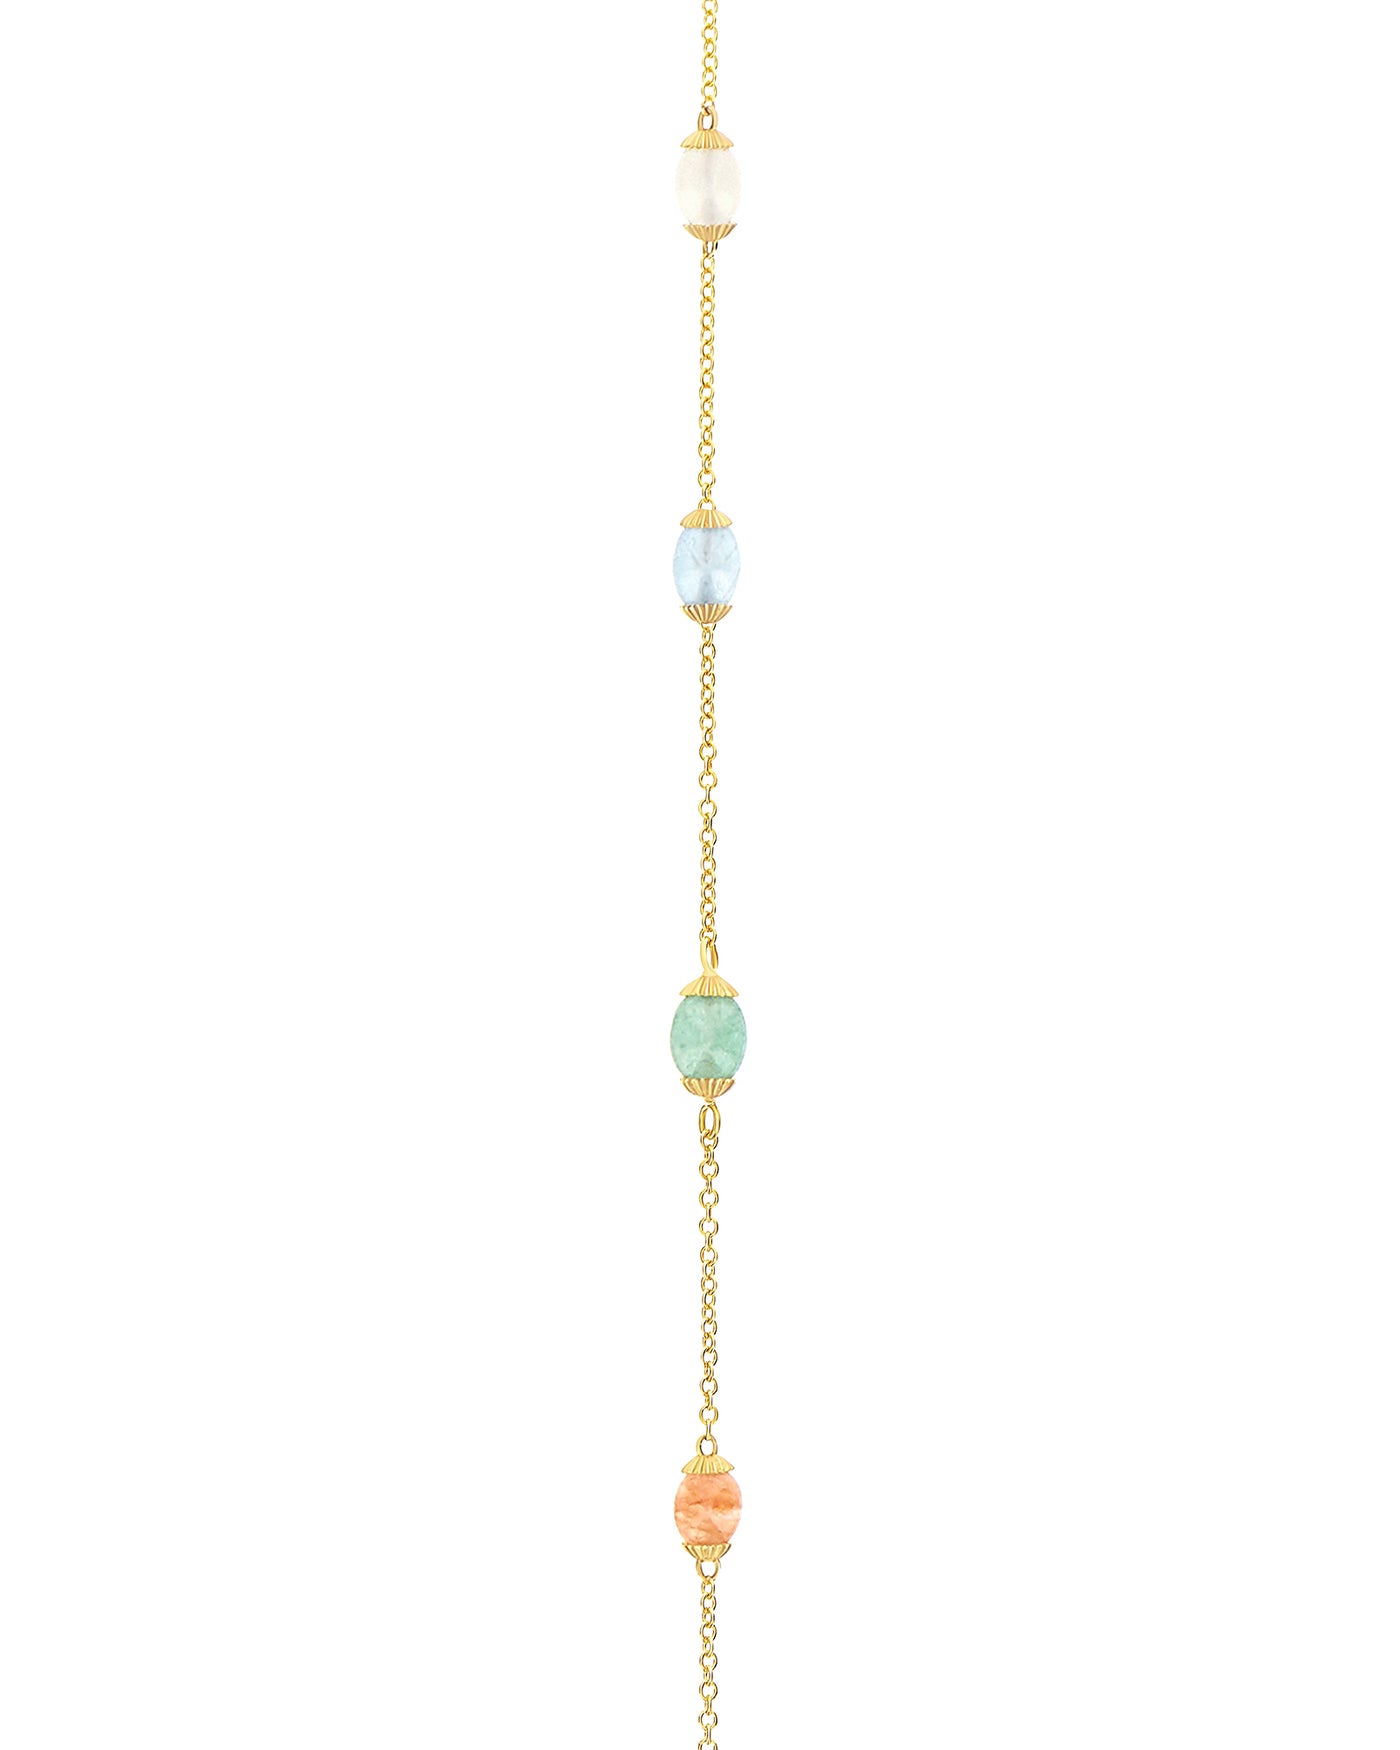 "Rainbow" gold and natural stones convertible necklace (large)